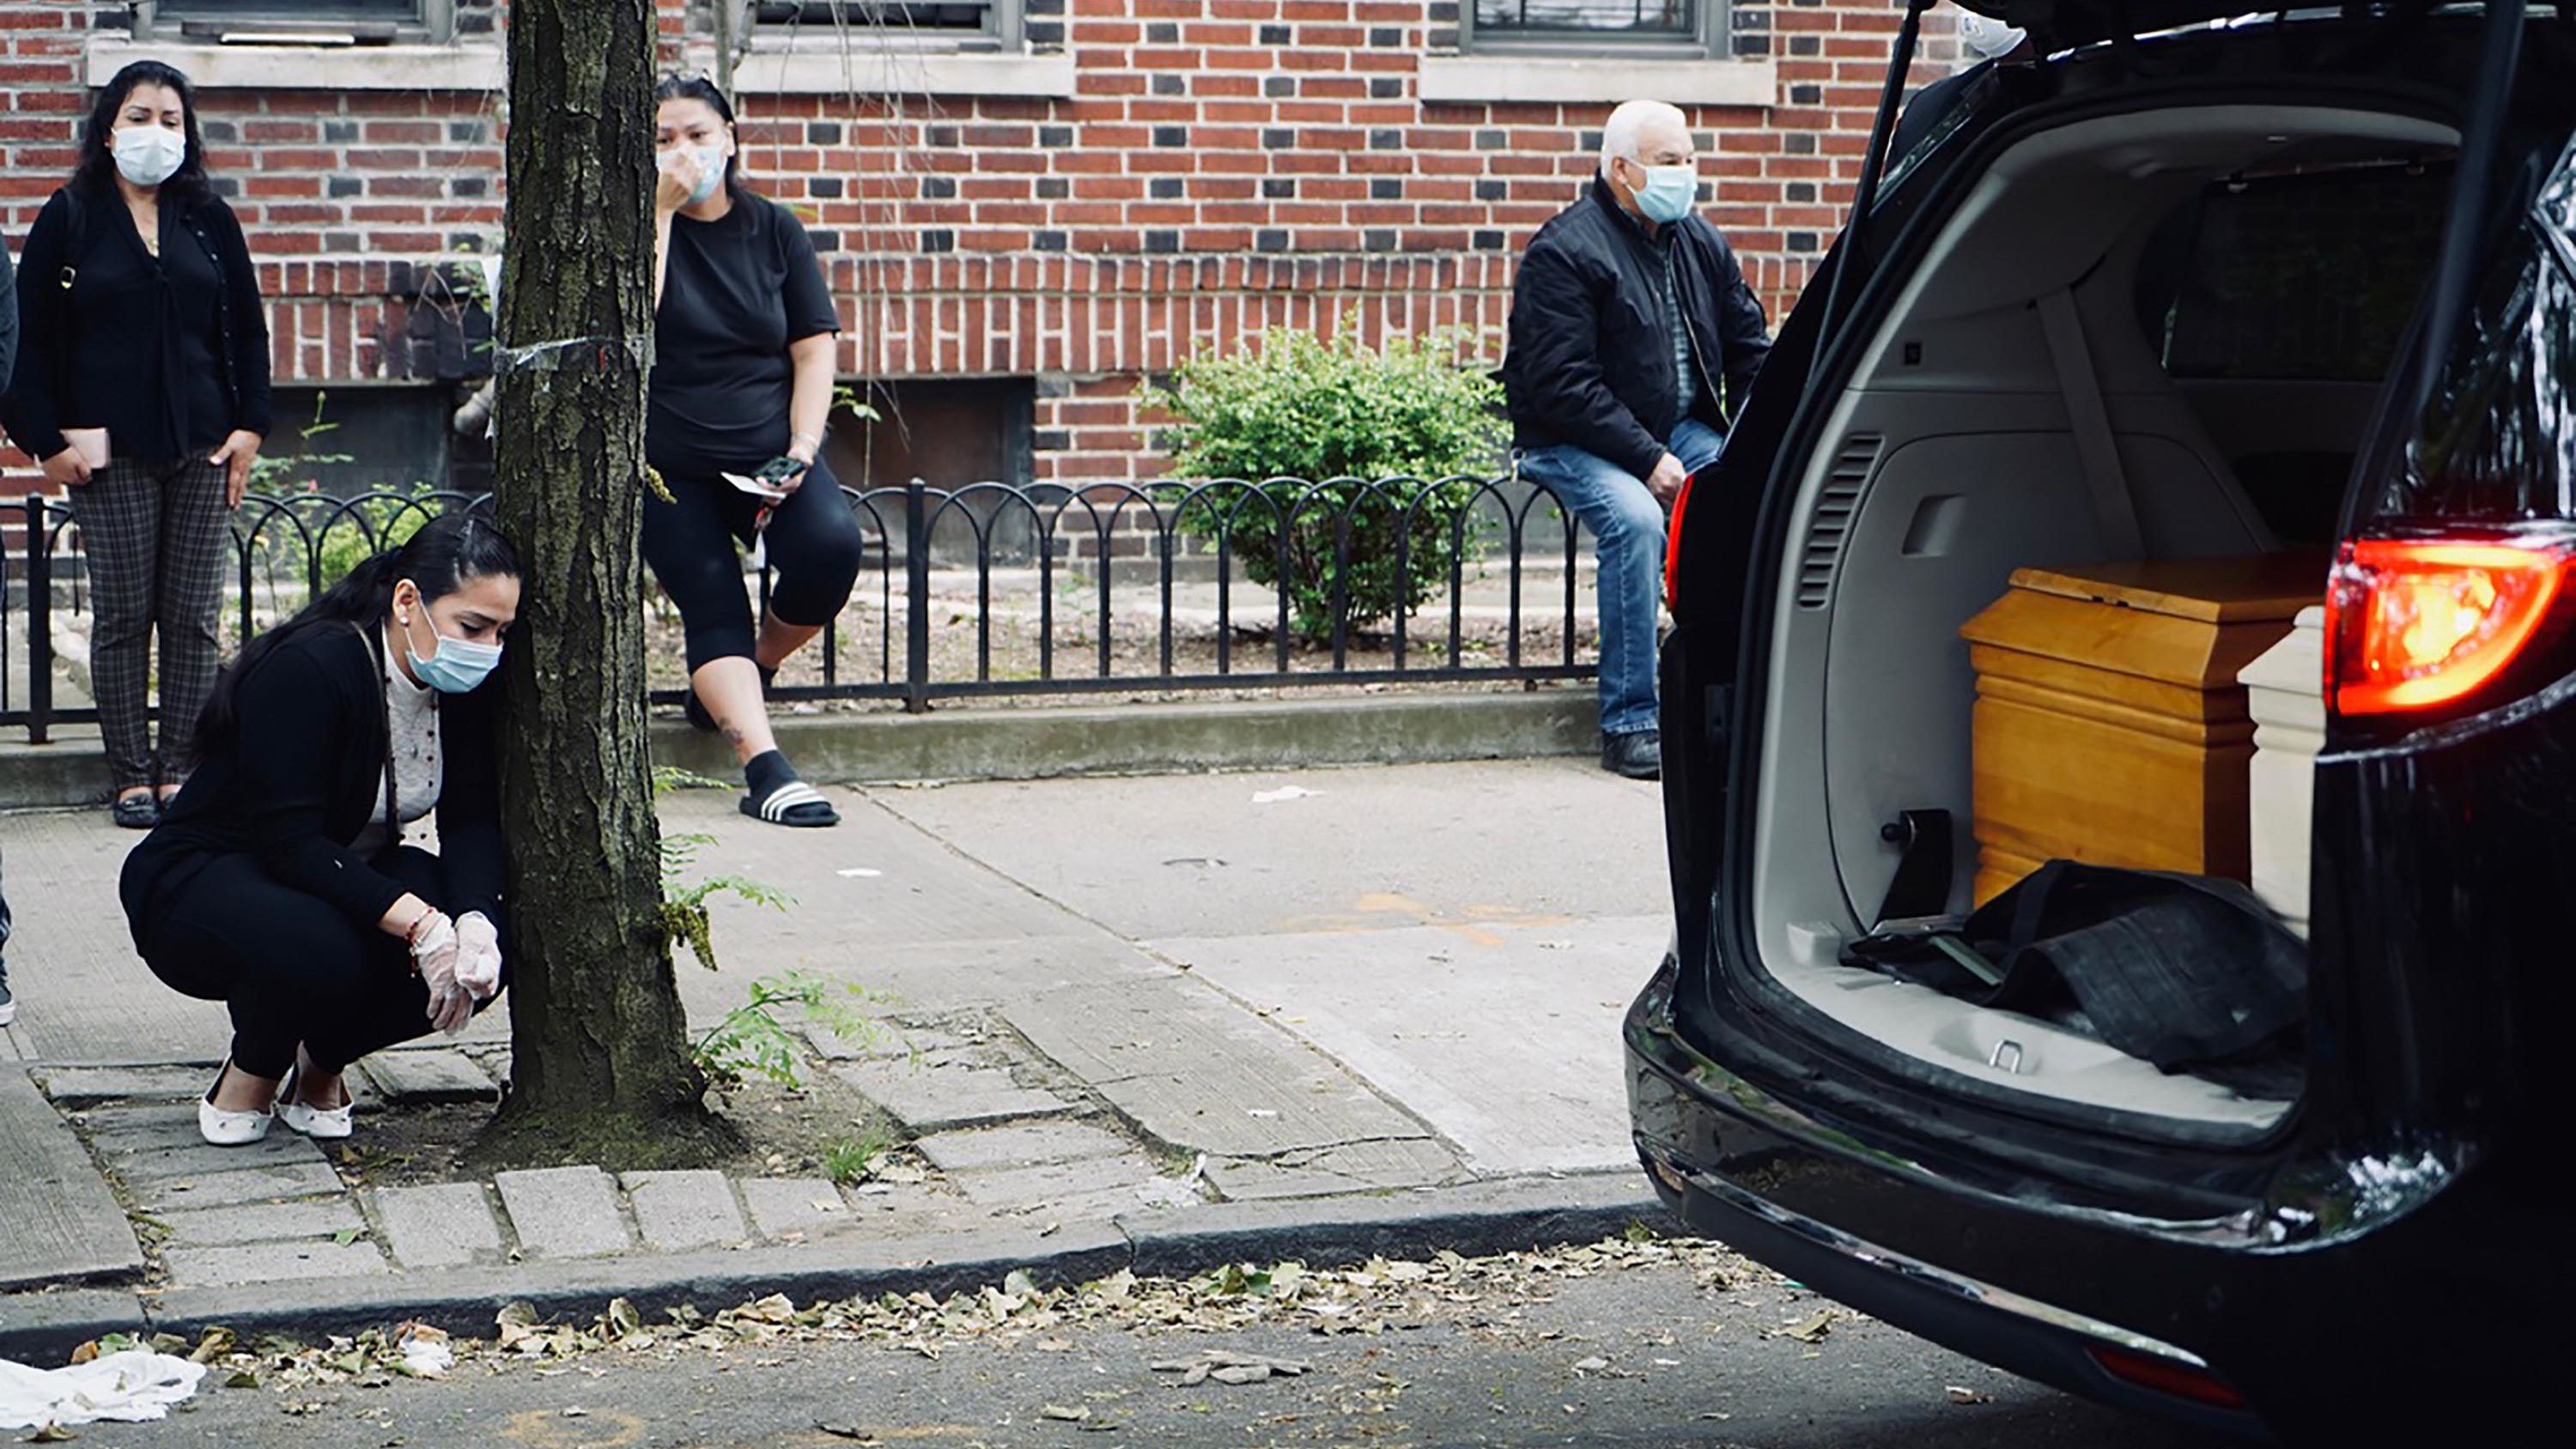 Friends and family wore facemasks and tried to socially distance as they bid farewell to Carlos and Lordes Coronel. The two coffins laid side-by-side in the back of a van that stopped in front their family home in Brooklyn, New York.  